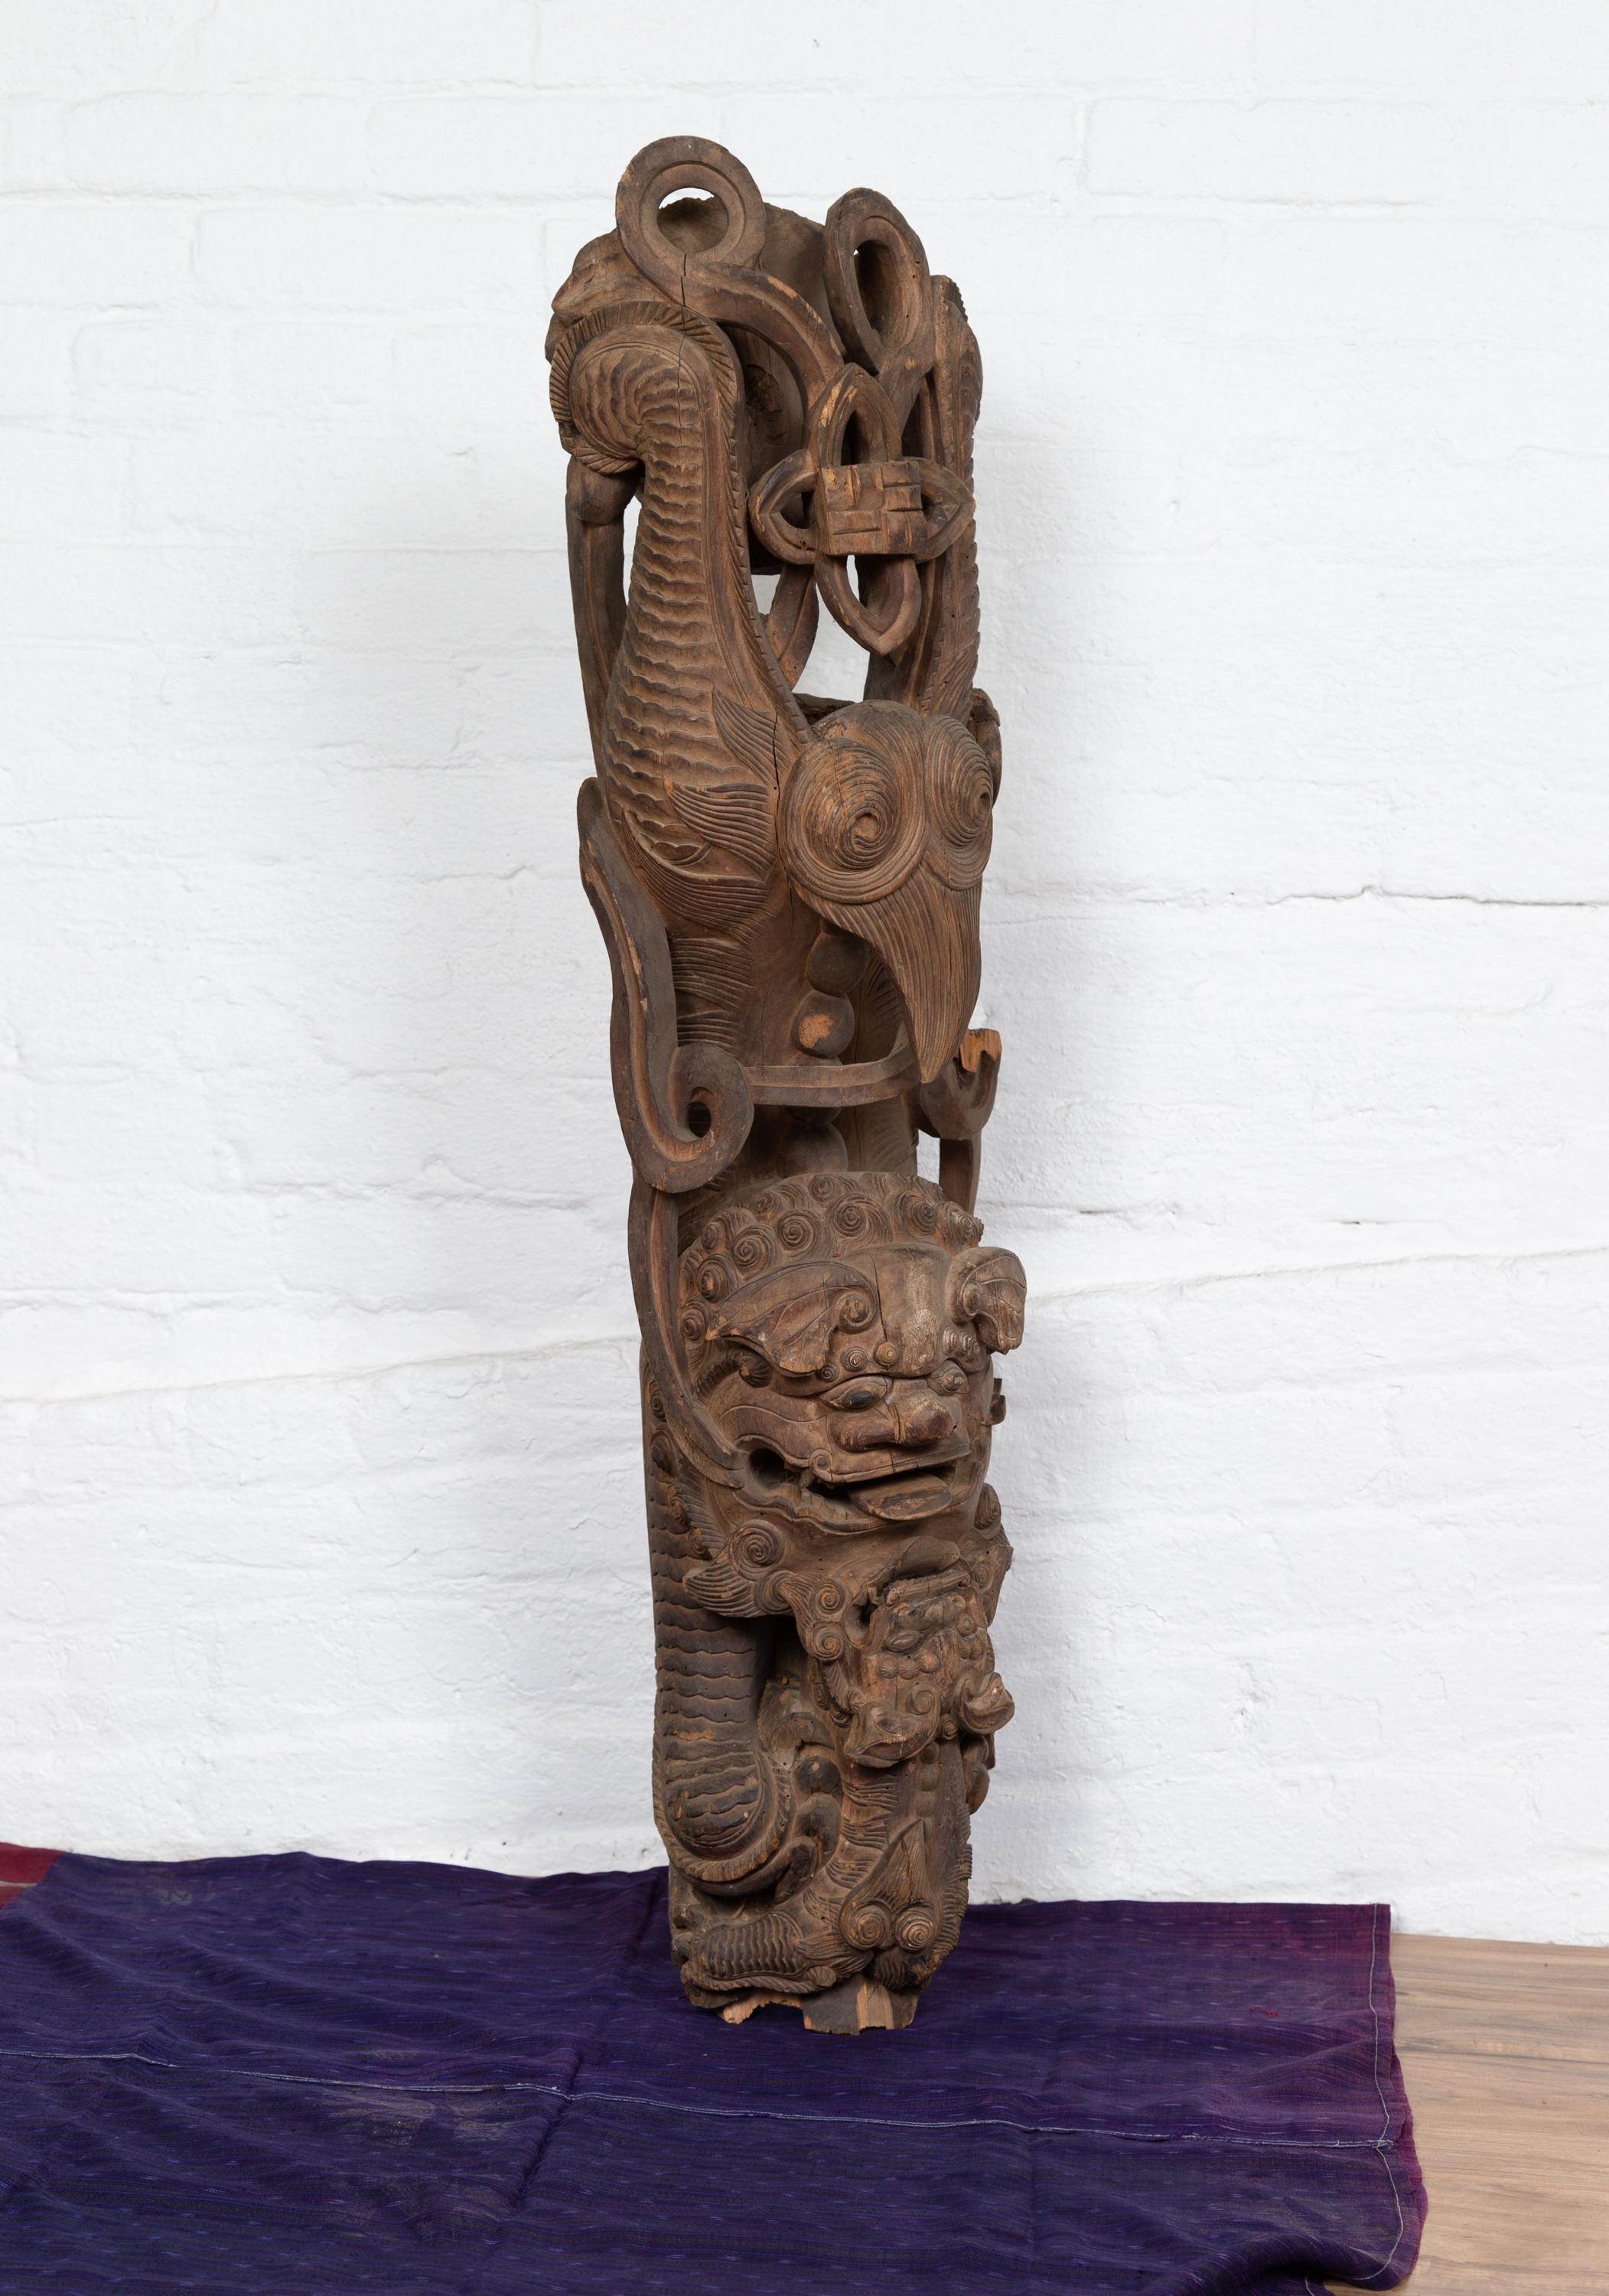 A pair of 18th or 19th century Chinese wooden carvings from a temple wall, depicting guardian lions. Born in Imperial China, each of this pair of temple carvings depicts a guardian lion boasting exquisite scrolled accents and a striking expression.